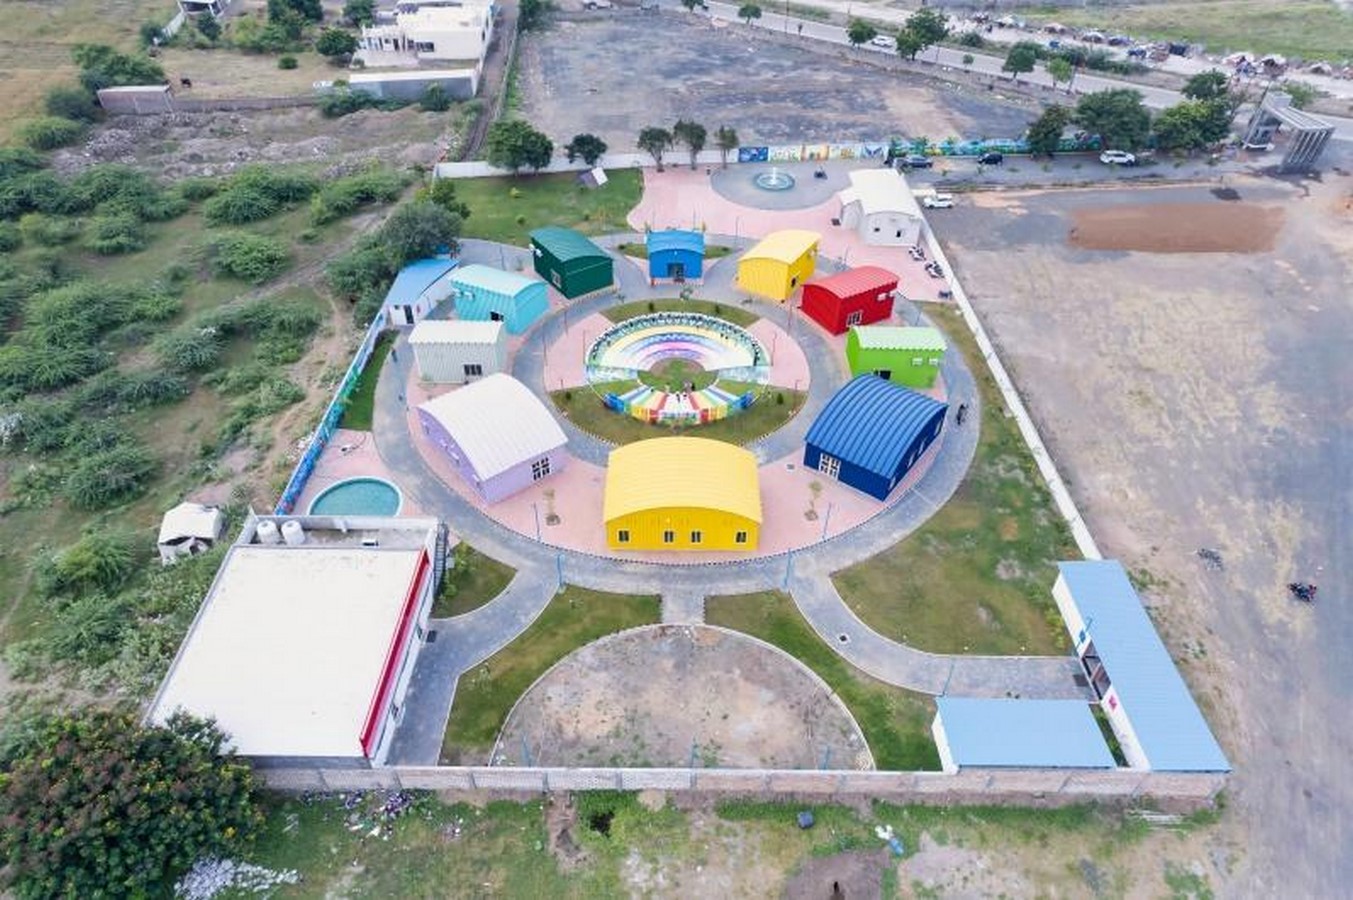 Indian preschool built as colourful as the minds of its users by Shreesh Design Studio - Sheet3